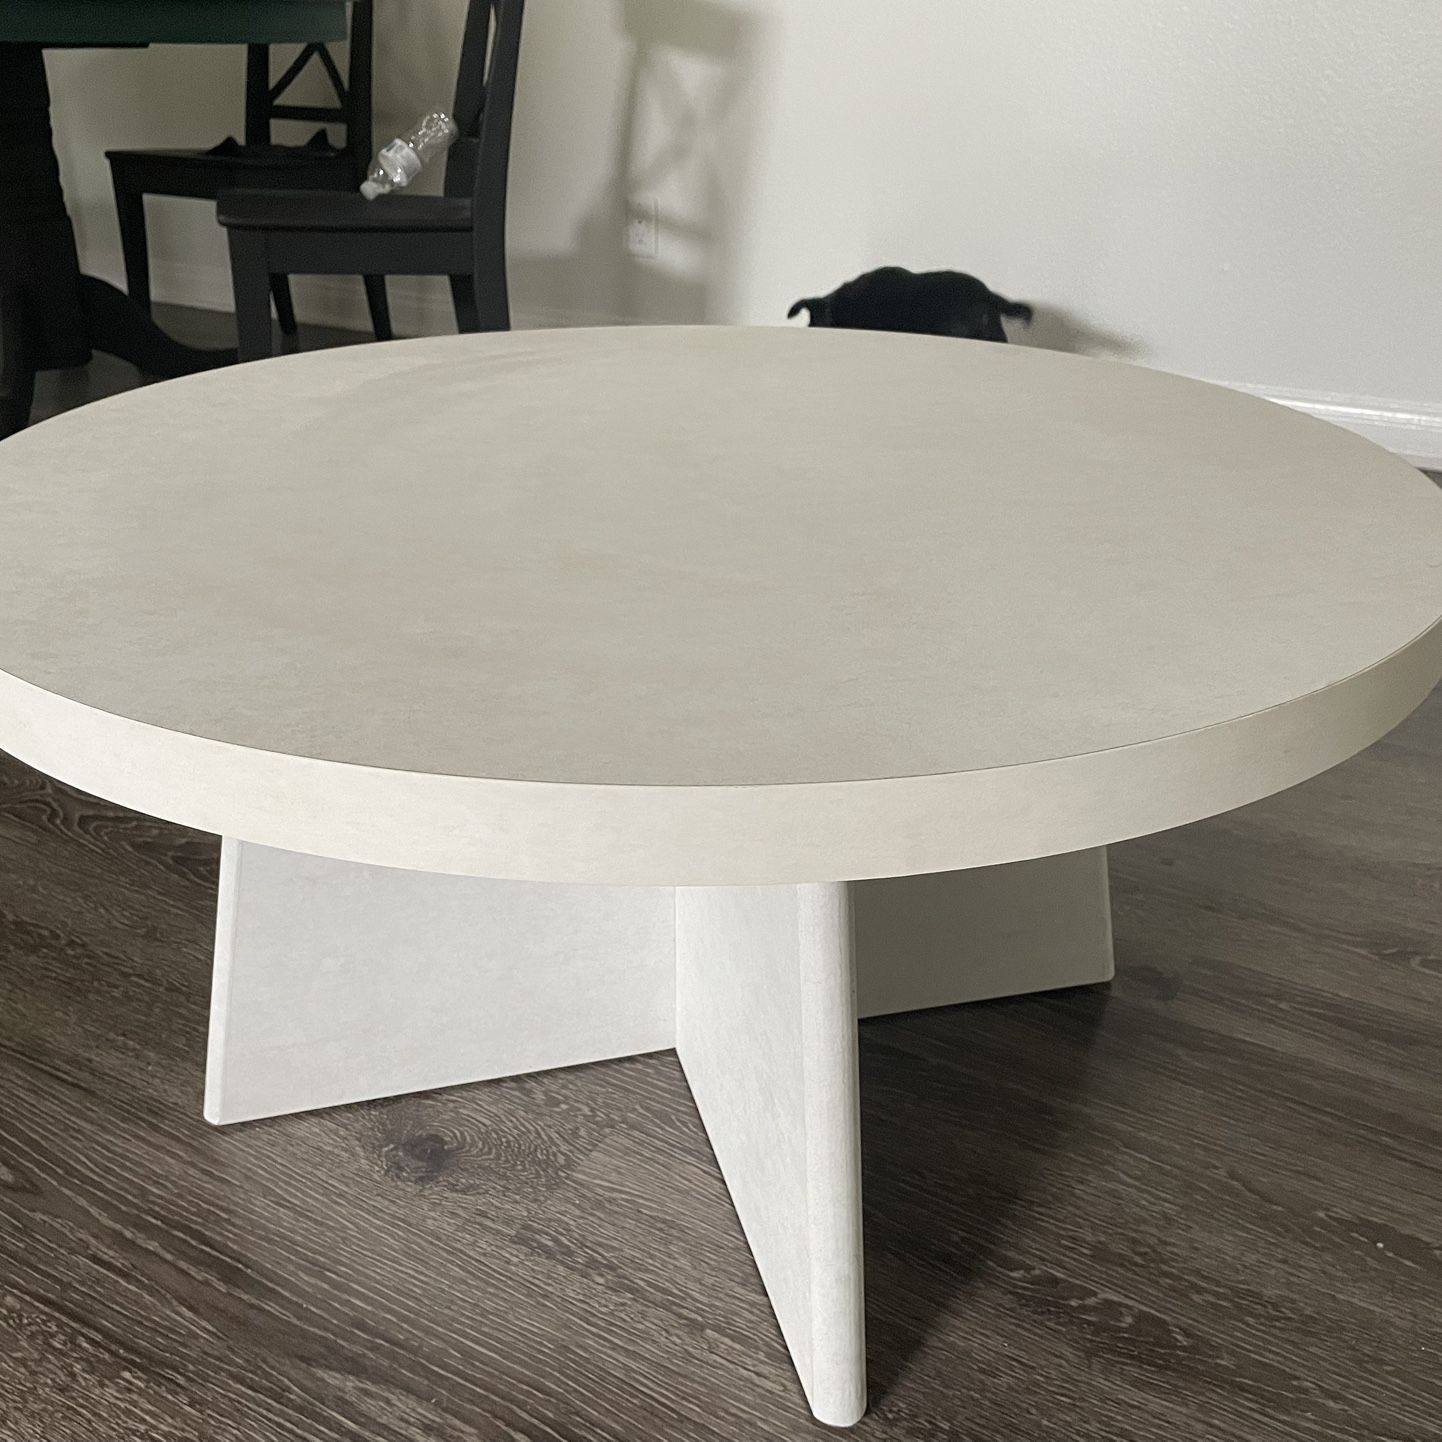 Queer Eye Liam Round Coffee Table For Sale In Huntington Beach, Ca – Offerup For Liam Round Plaster Coffee Tables (Photo 8 of 15)